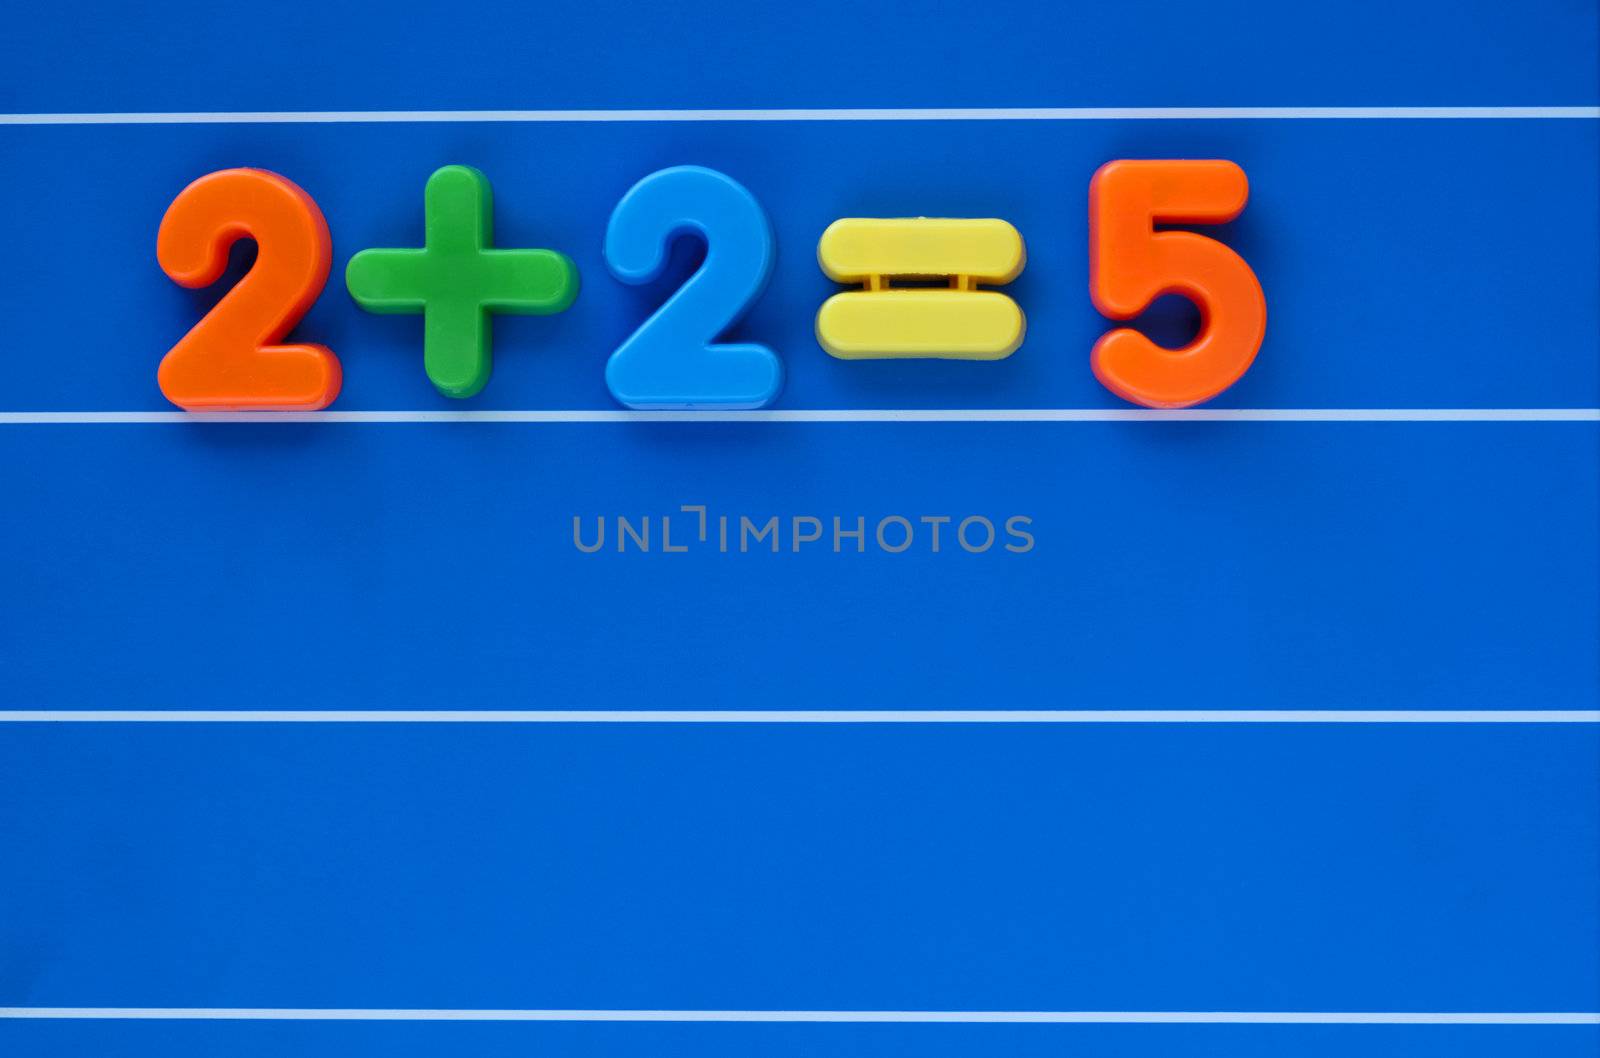 The classic "putting two and two together and getting five", created from a child's toy number set. Sum placed at top left, leaving space for text below.